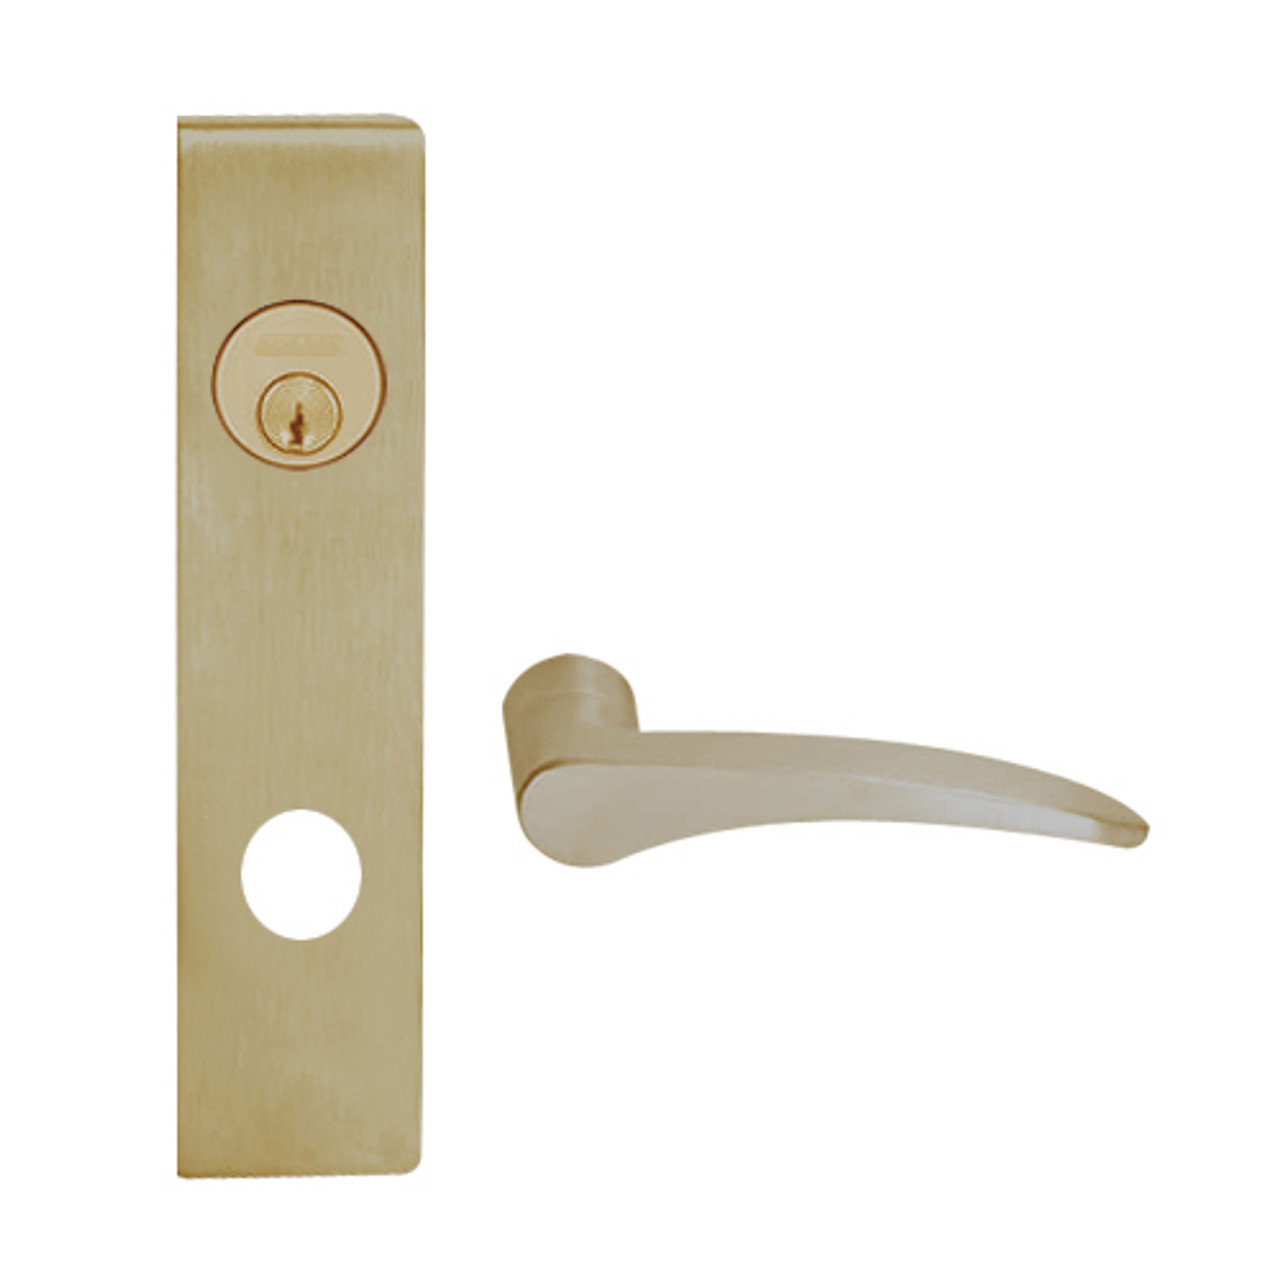 L9453P-12L-613-RH Schlage L Series Entrance with Deadbolt Commercial Mortise Lock with 12 Cast Lever Design in Oil Rubbed Bronze